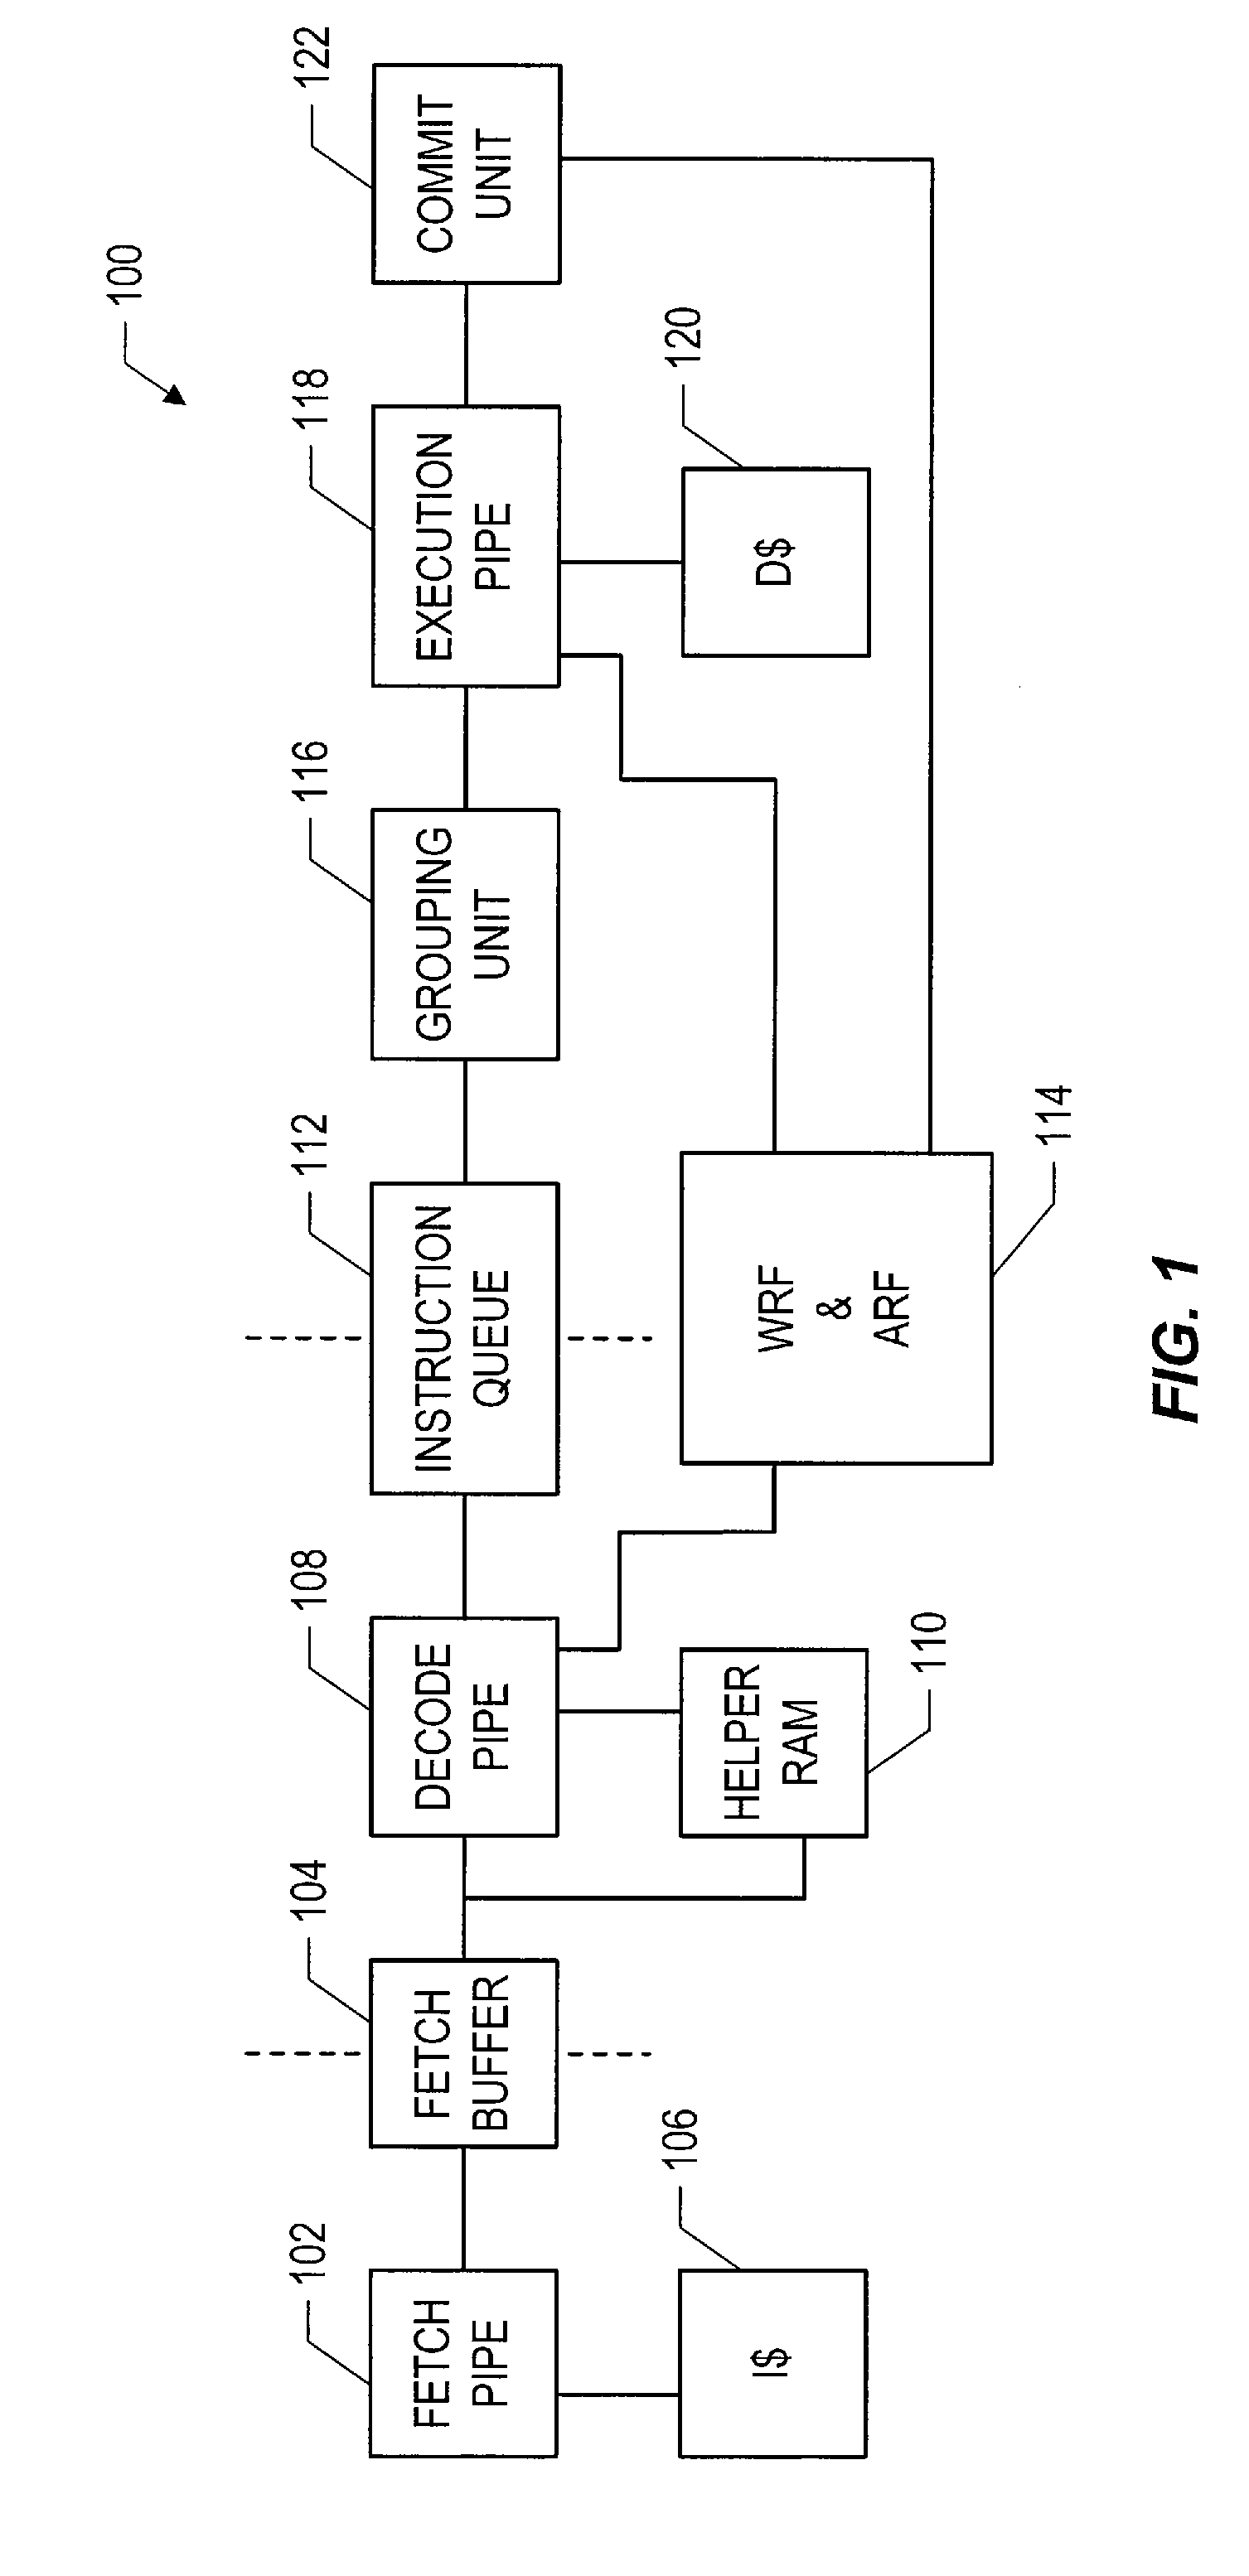 Effective elimination of delay slot handling from a front section of a processor pipeline